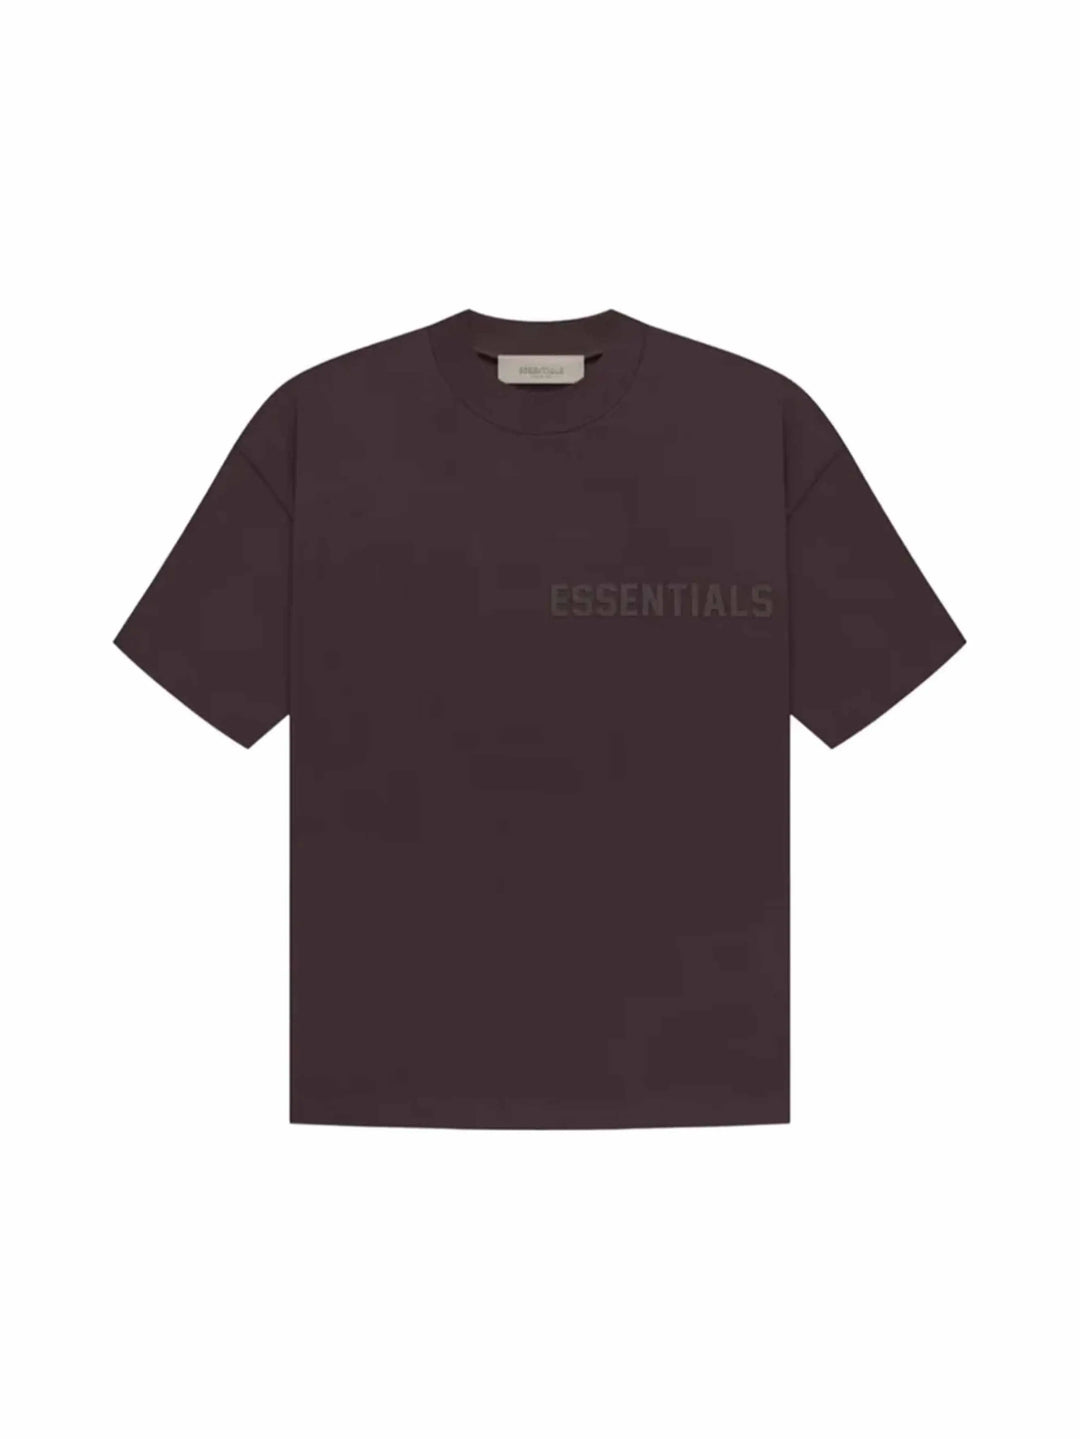 Fear of God Essentials SS Tee Plum in Auckland, New Zealand - Shop name